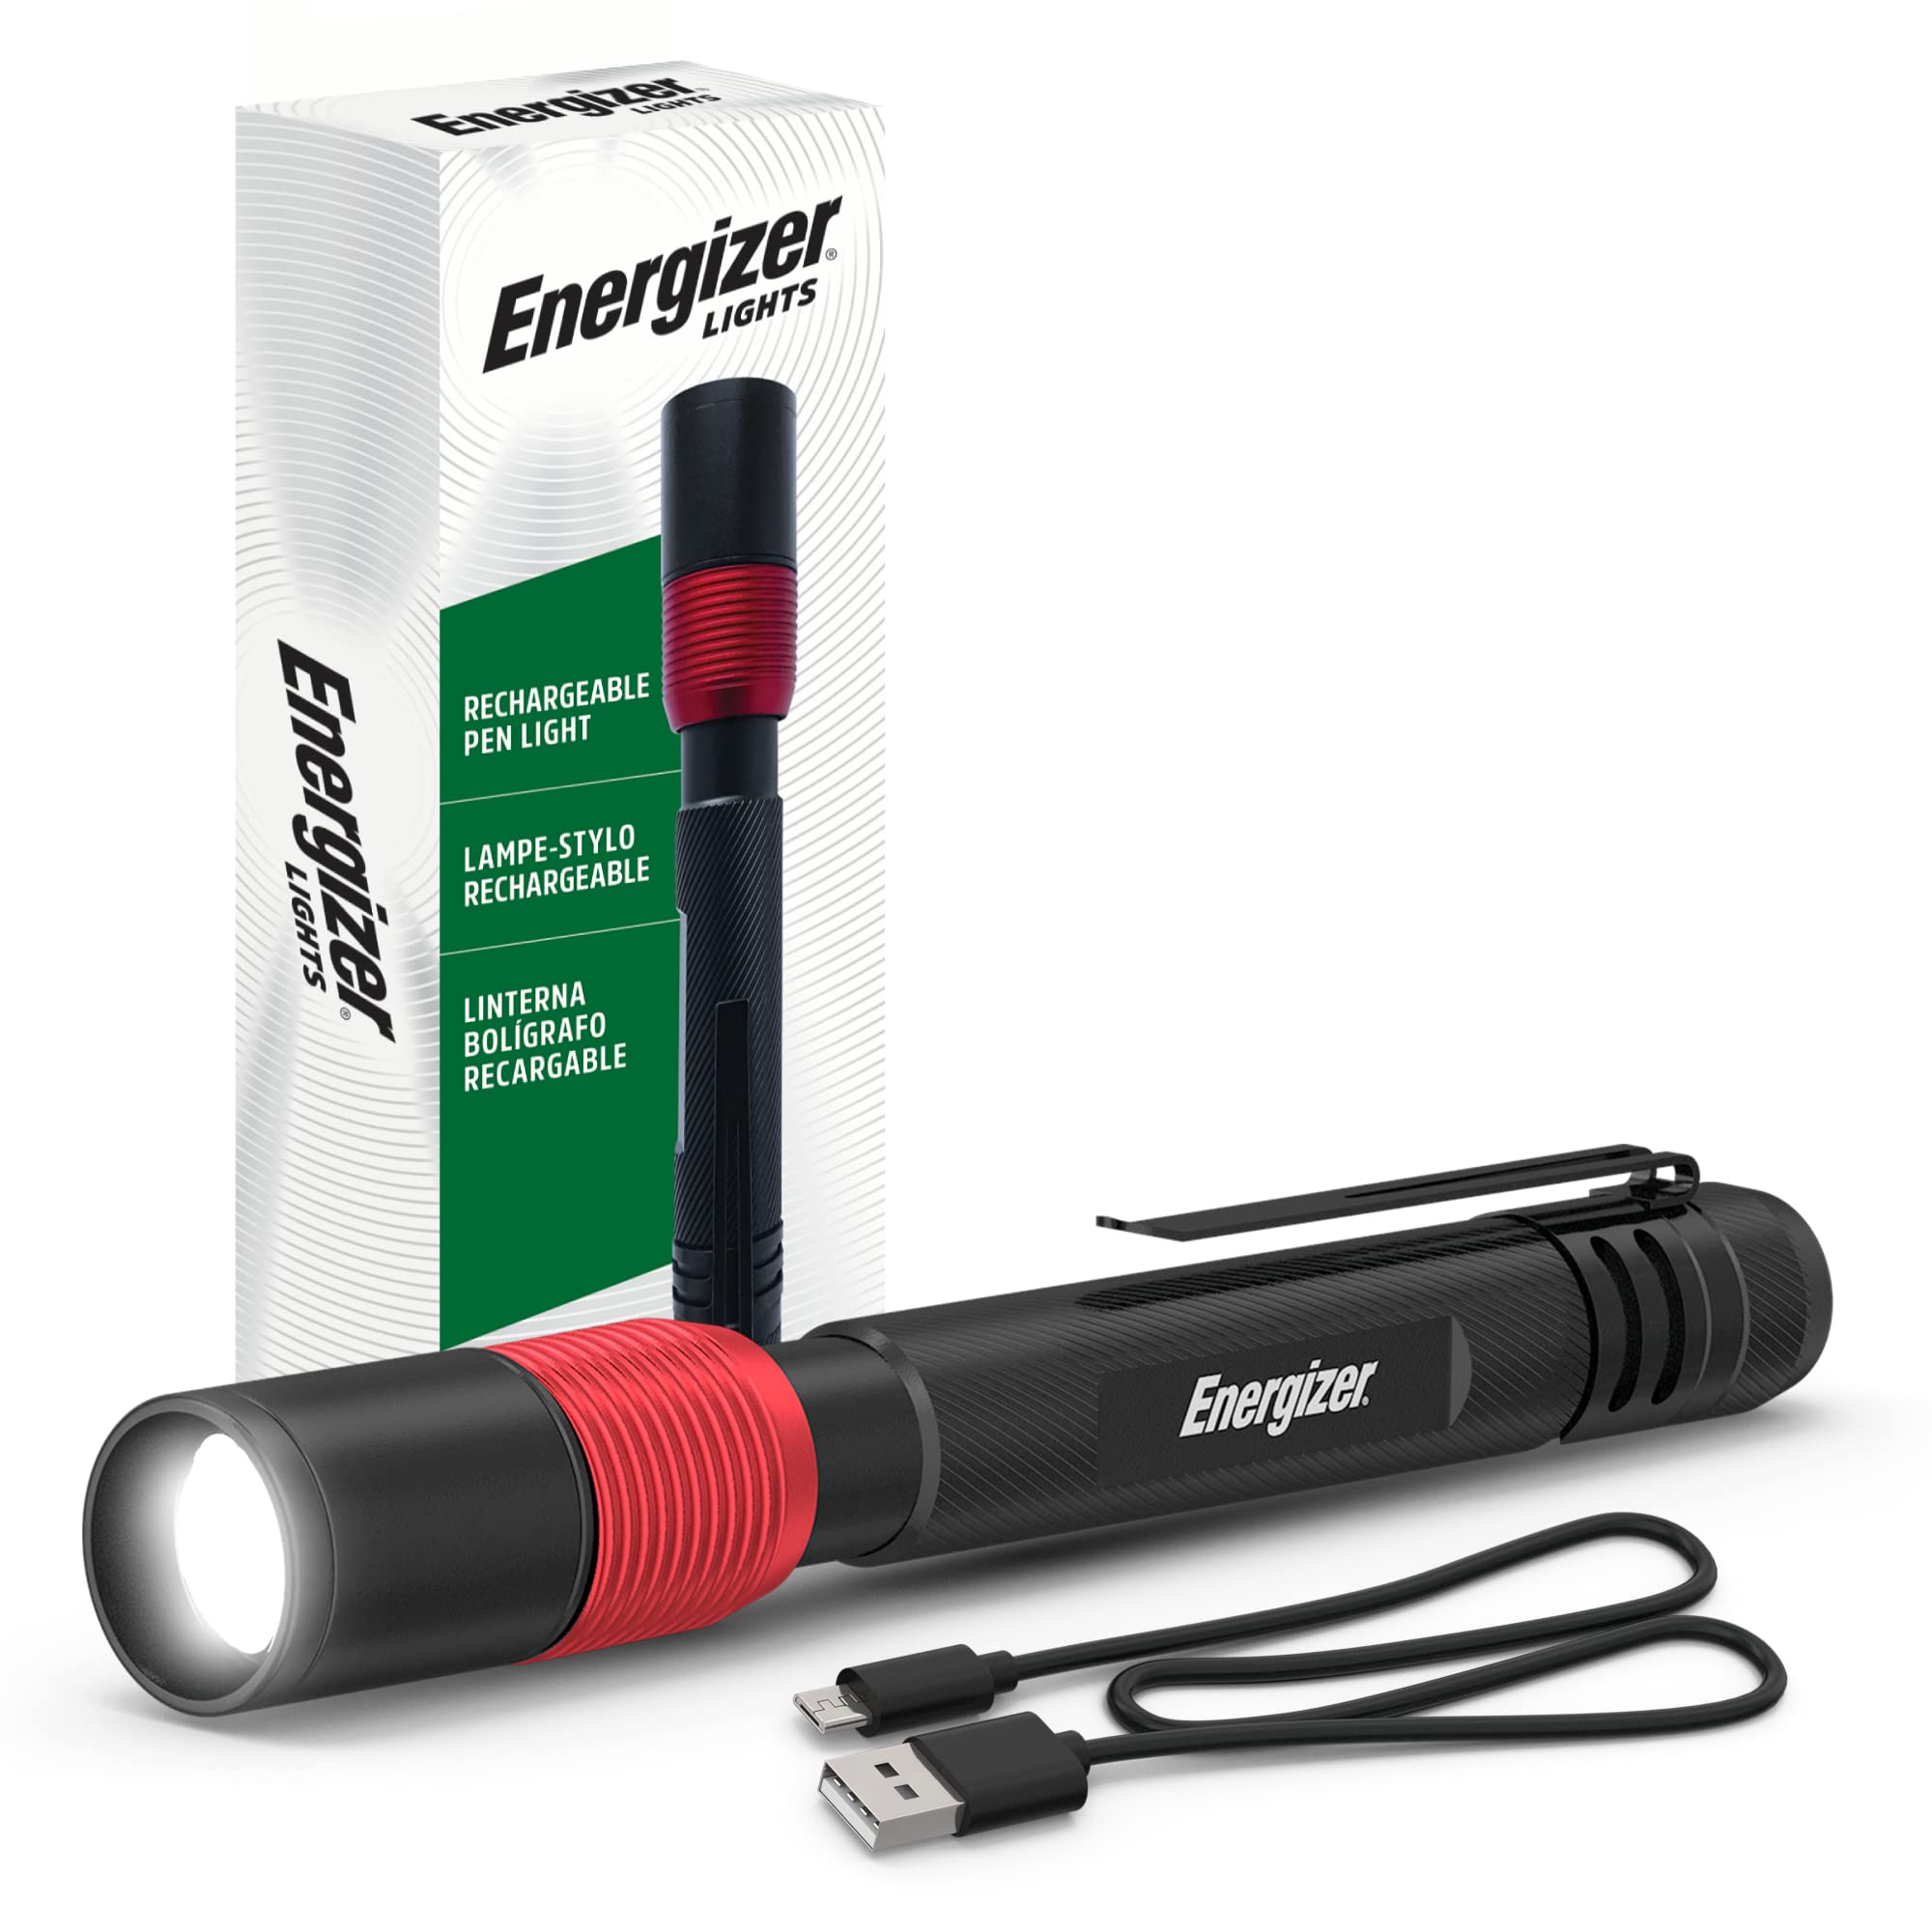 Energizer Rechargeable 400 Lumen IPX4 Water-Resistant Pen Flashlight $7.85 + Free Shipping w/ Prime or on $35+